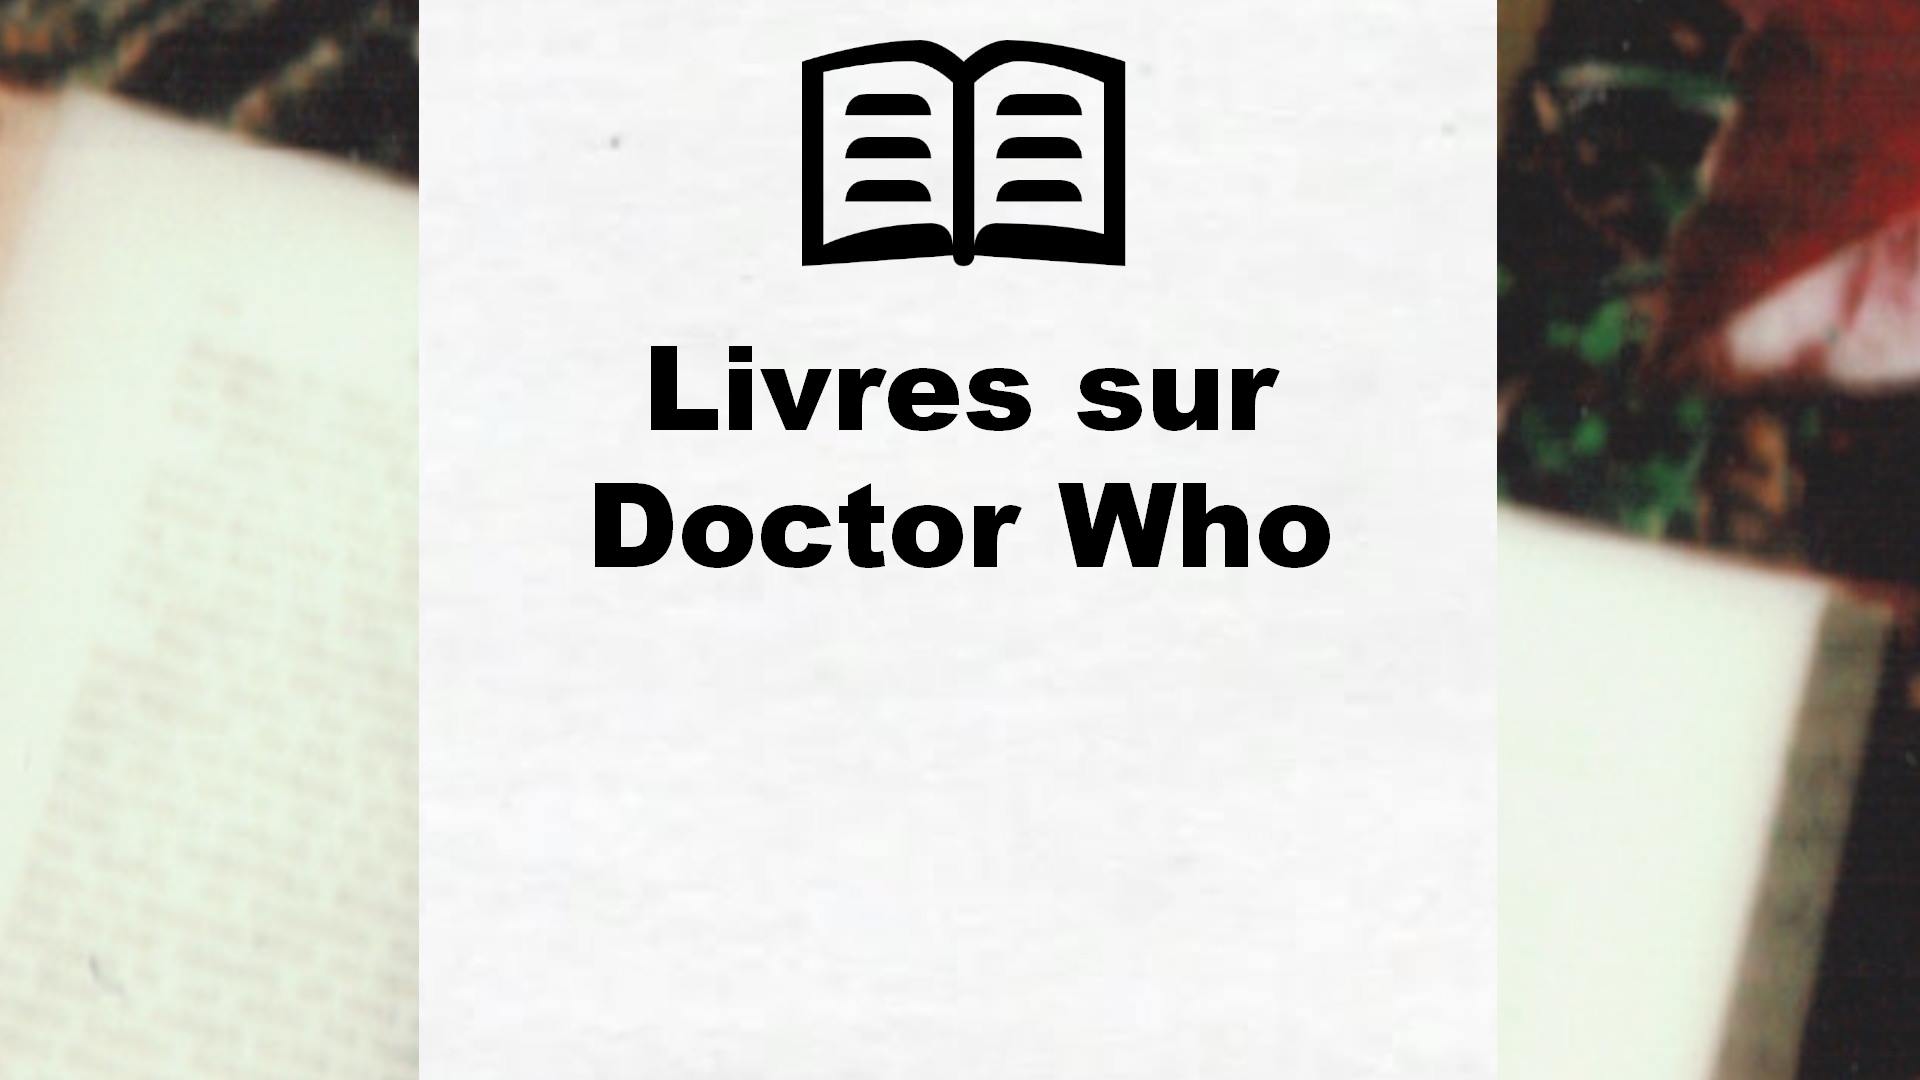 Livres sur Doctor Who